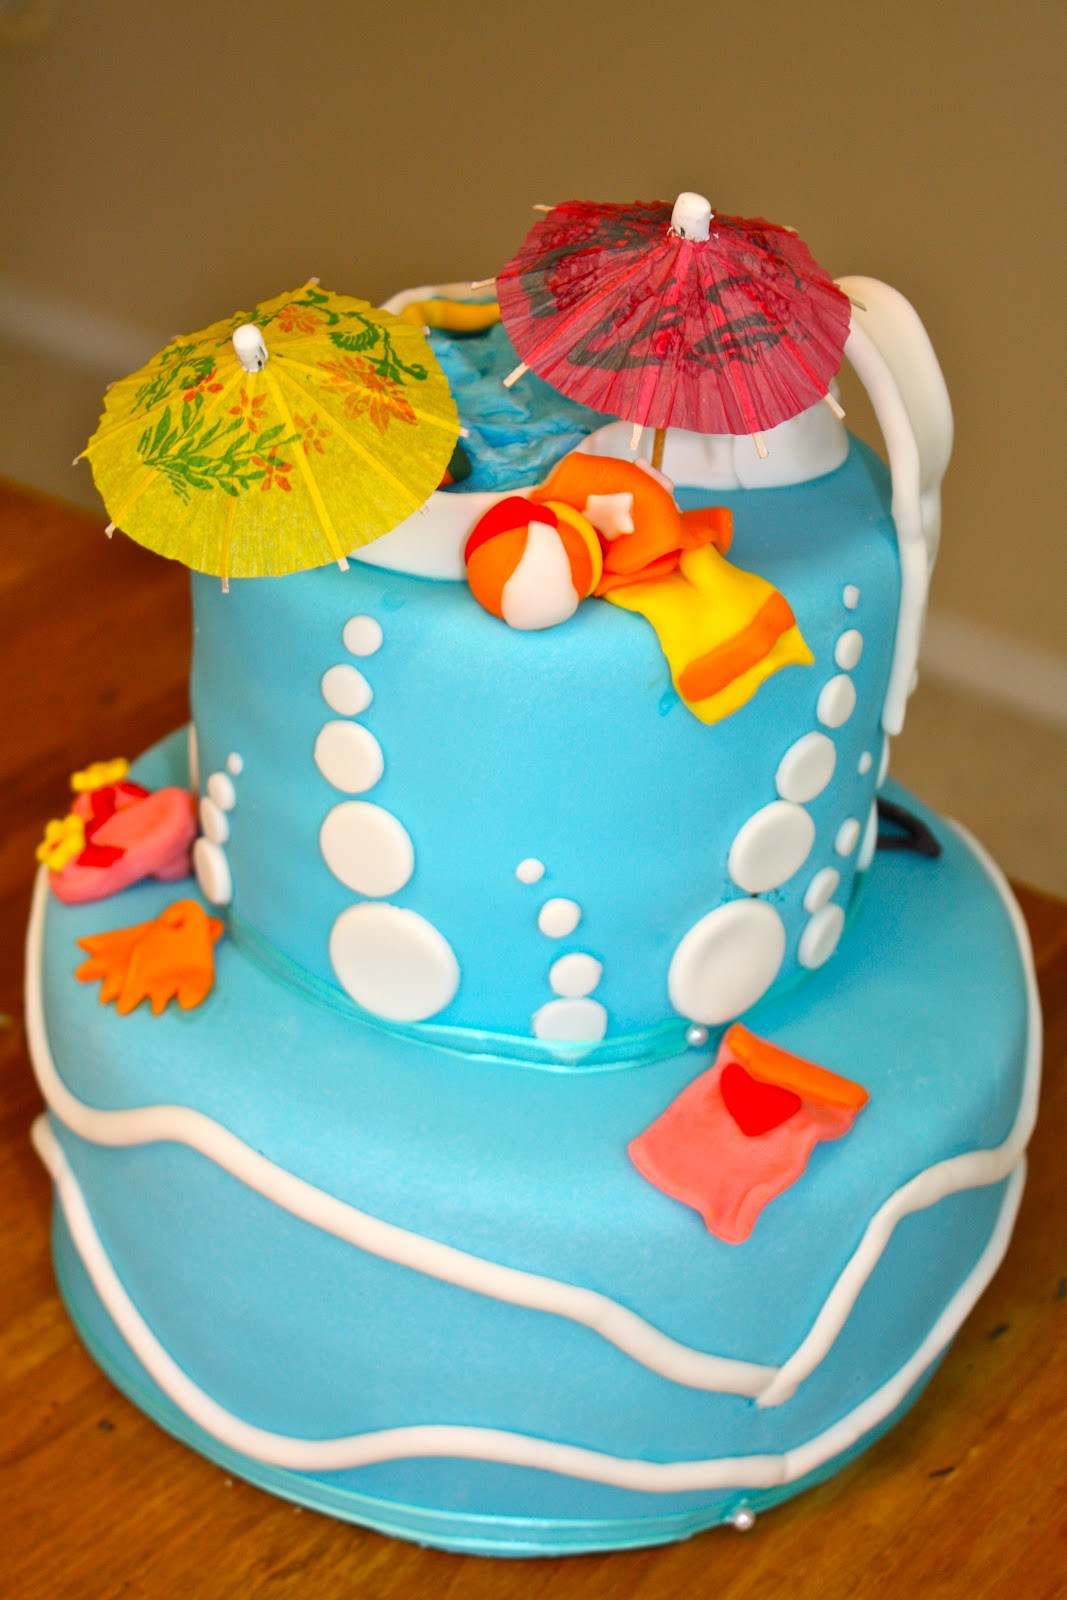 Pool Party Cake Ideas
 bumble cakes Summer Pool Party Birthday Cake